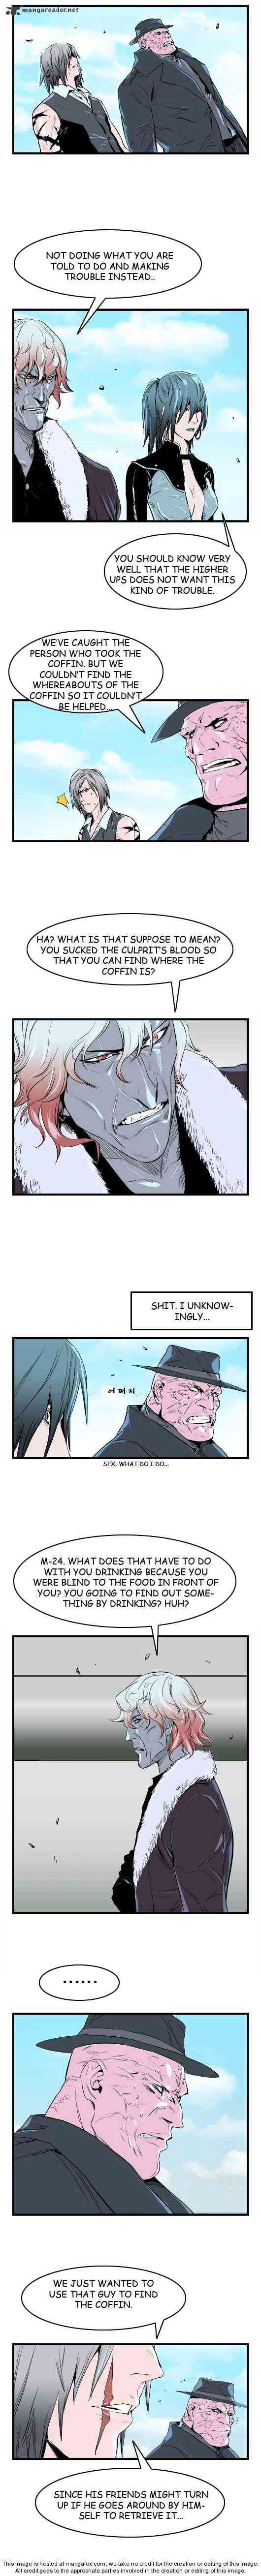 Noblesse Chapter 31 _ Chapters 31-45 page 34